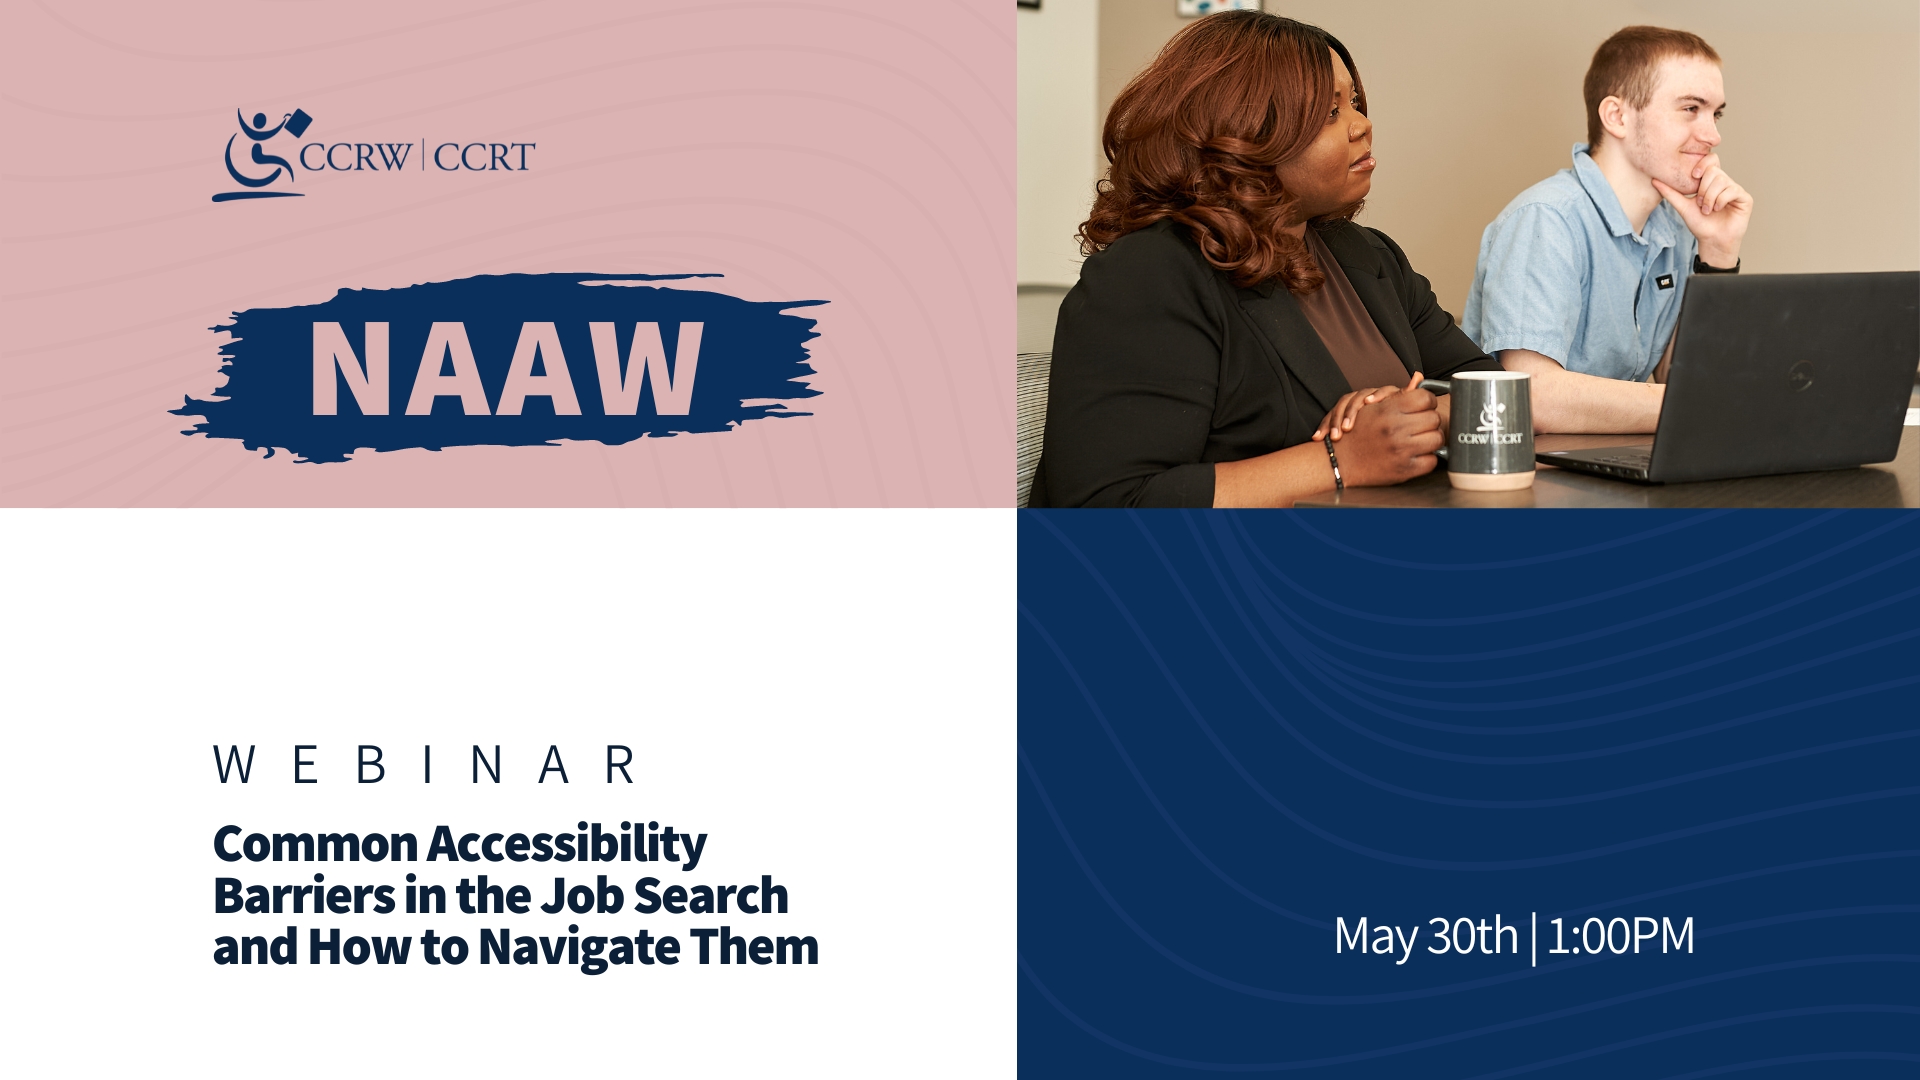 NAAW Webinar: Common Accessibility Barriers in the Job Search and How to Navigate Them